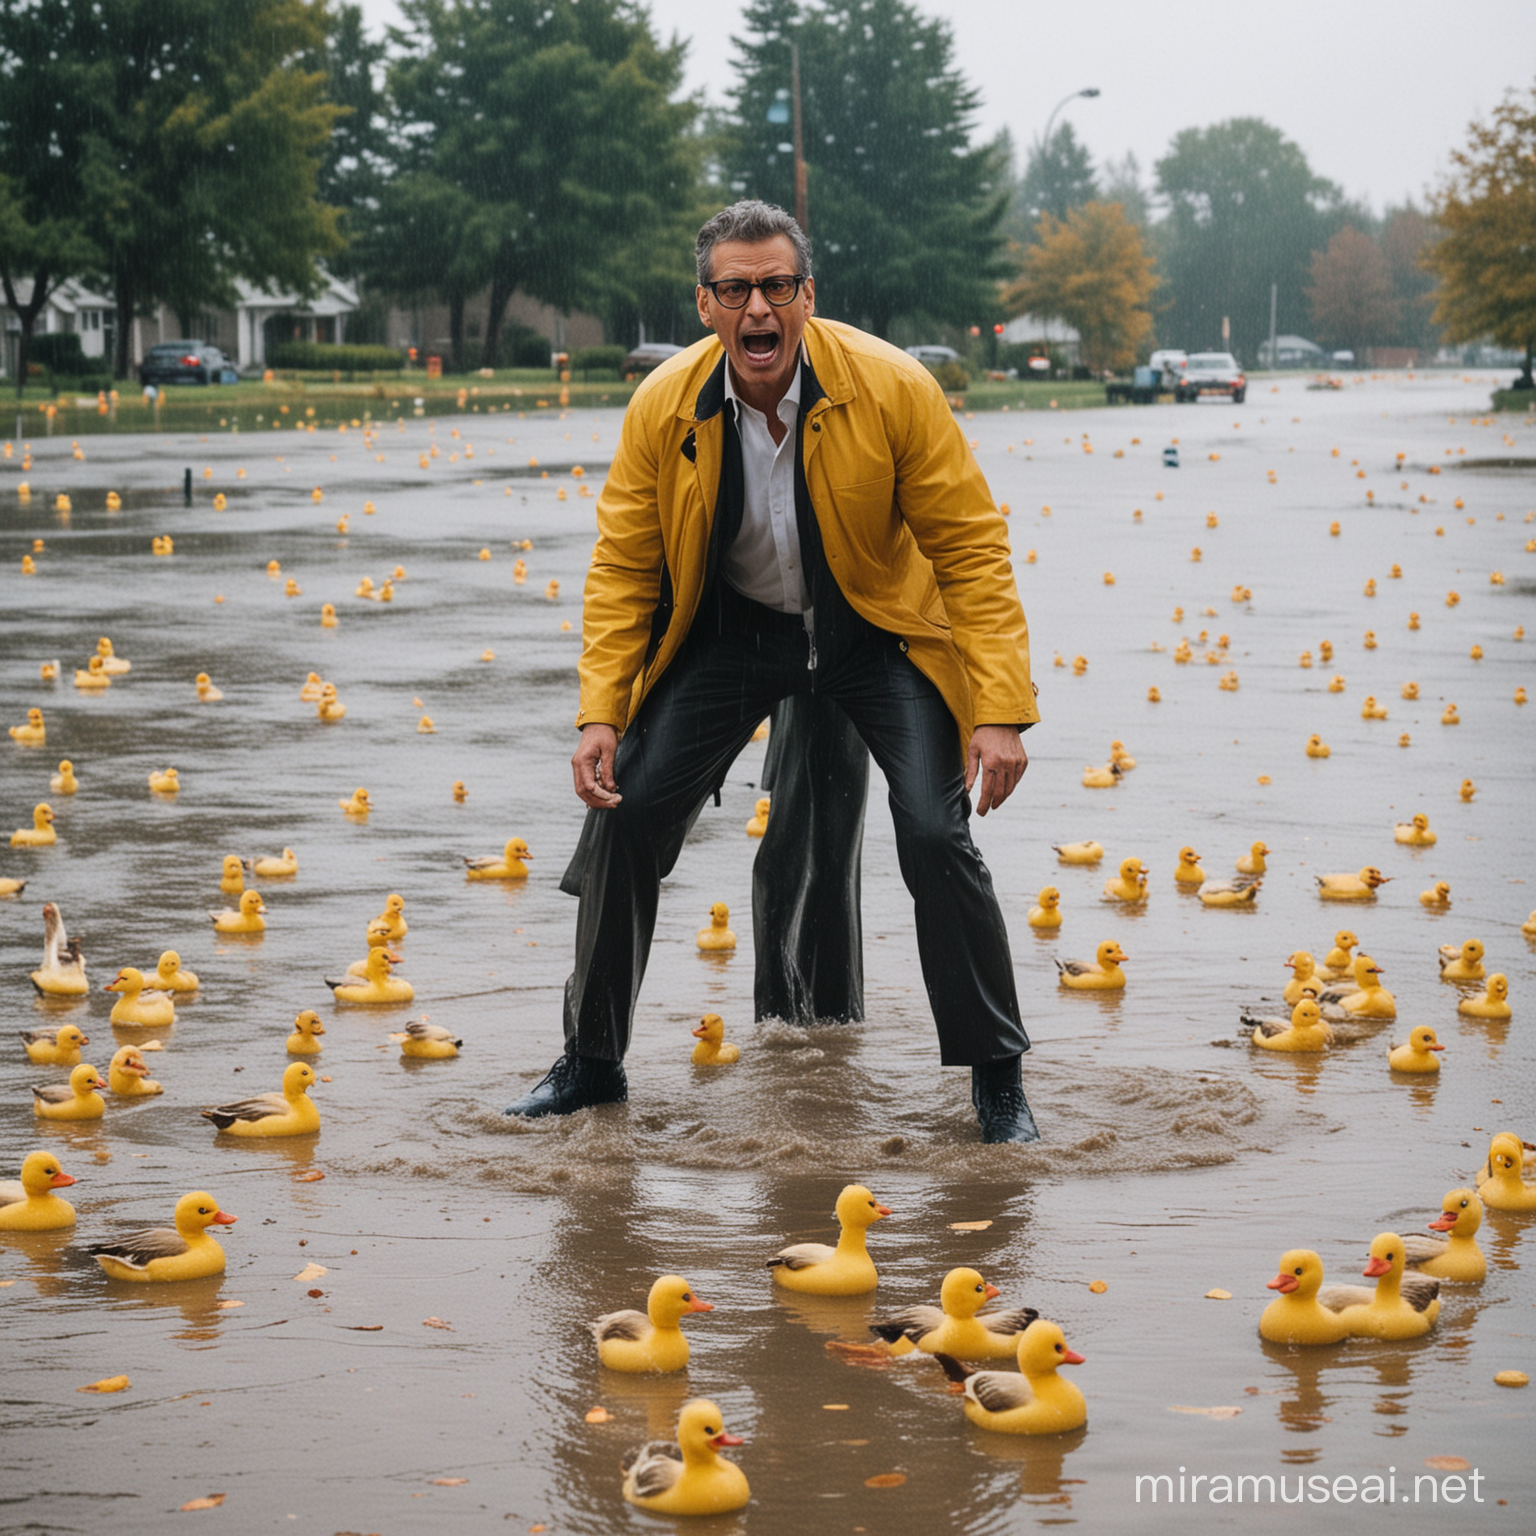 Jeff Goldblum fighting a Canadian goose in a flooded parking lot with rubber ducks in the water around them